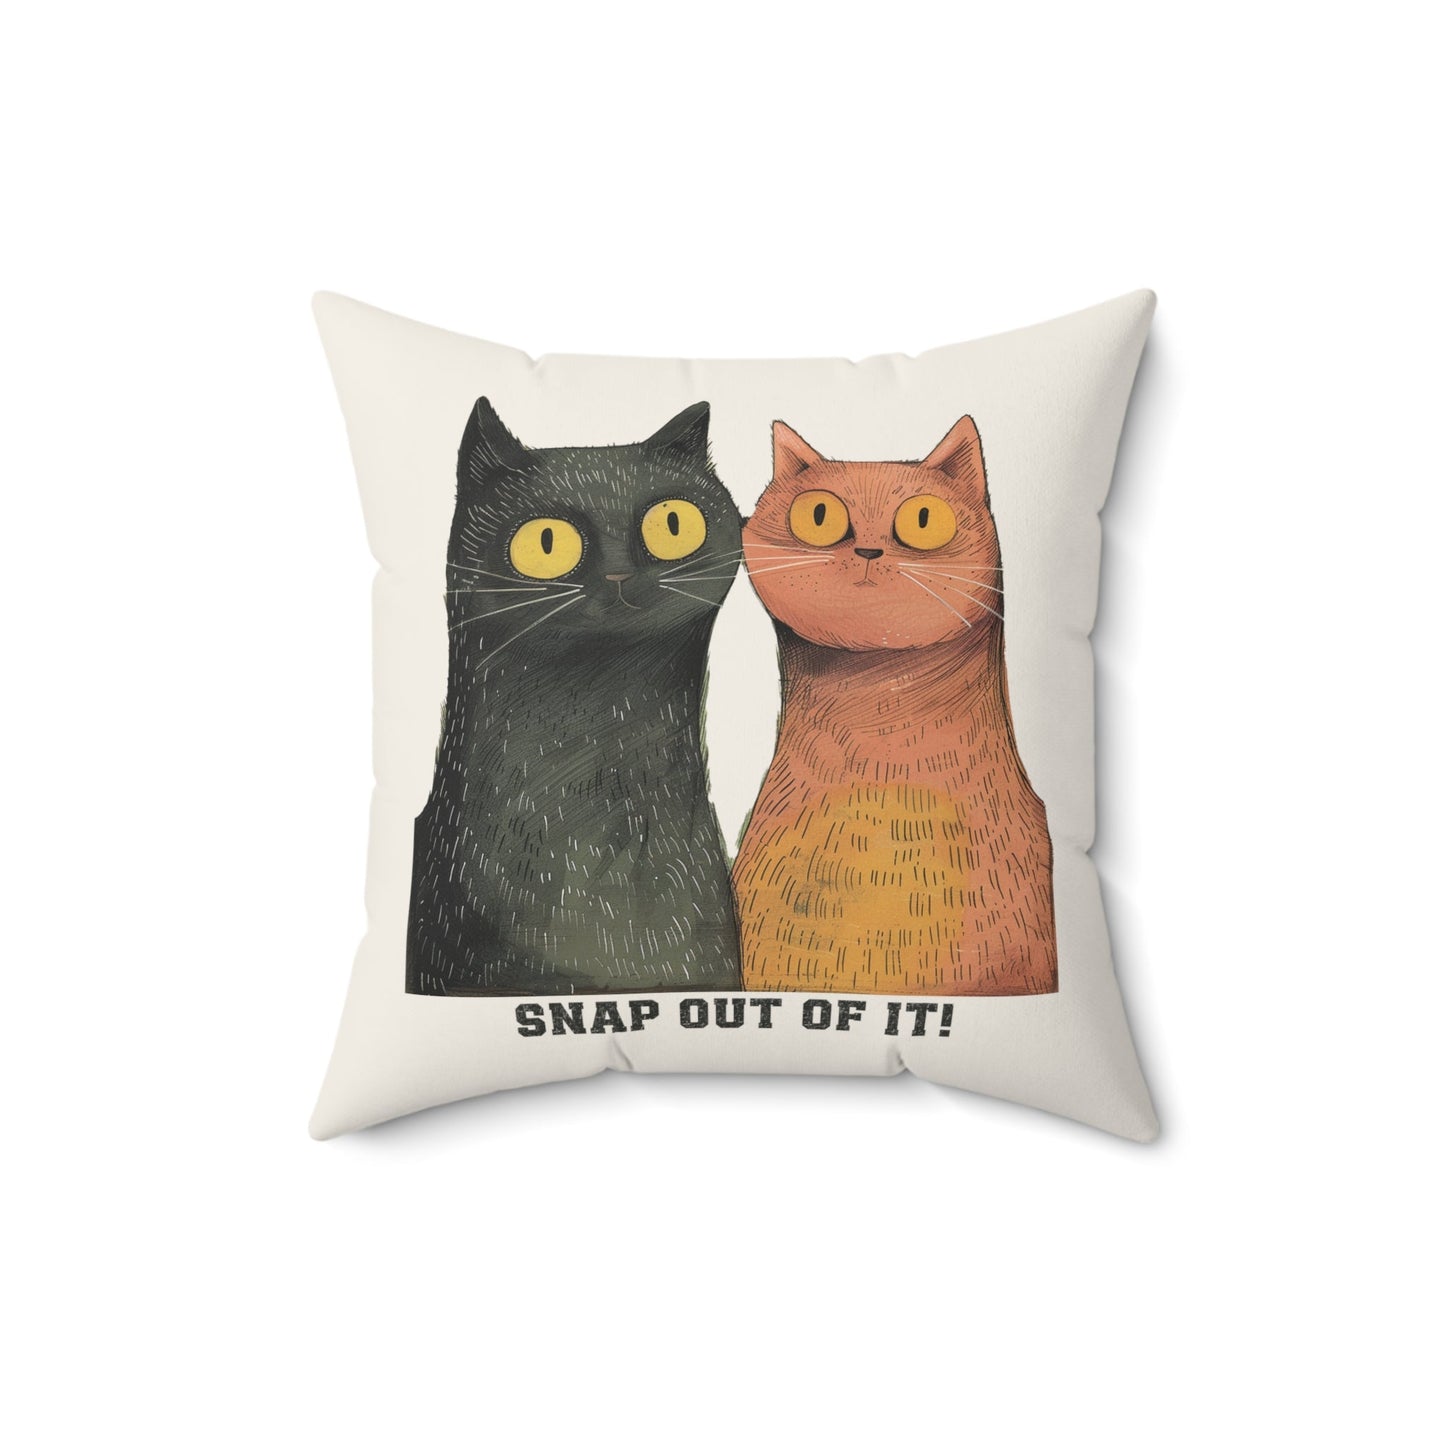 Funny Cat Pair Throw Pillow Cover, Whimsical Snap Out of It! Cushion Cover - FlooredByArt